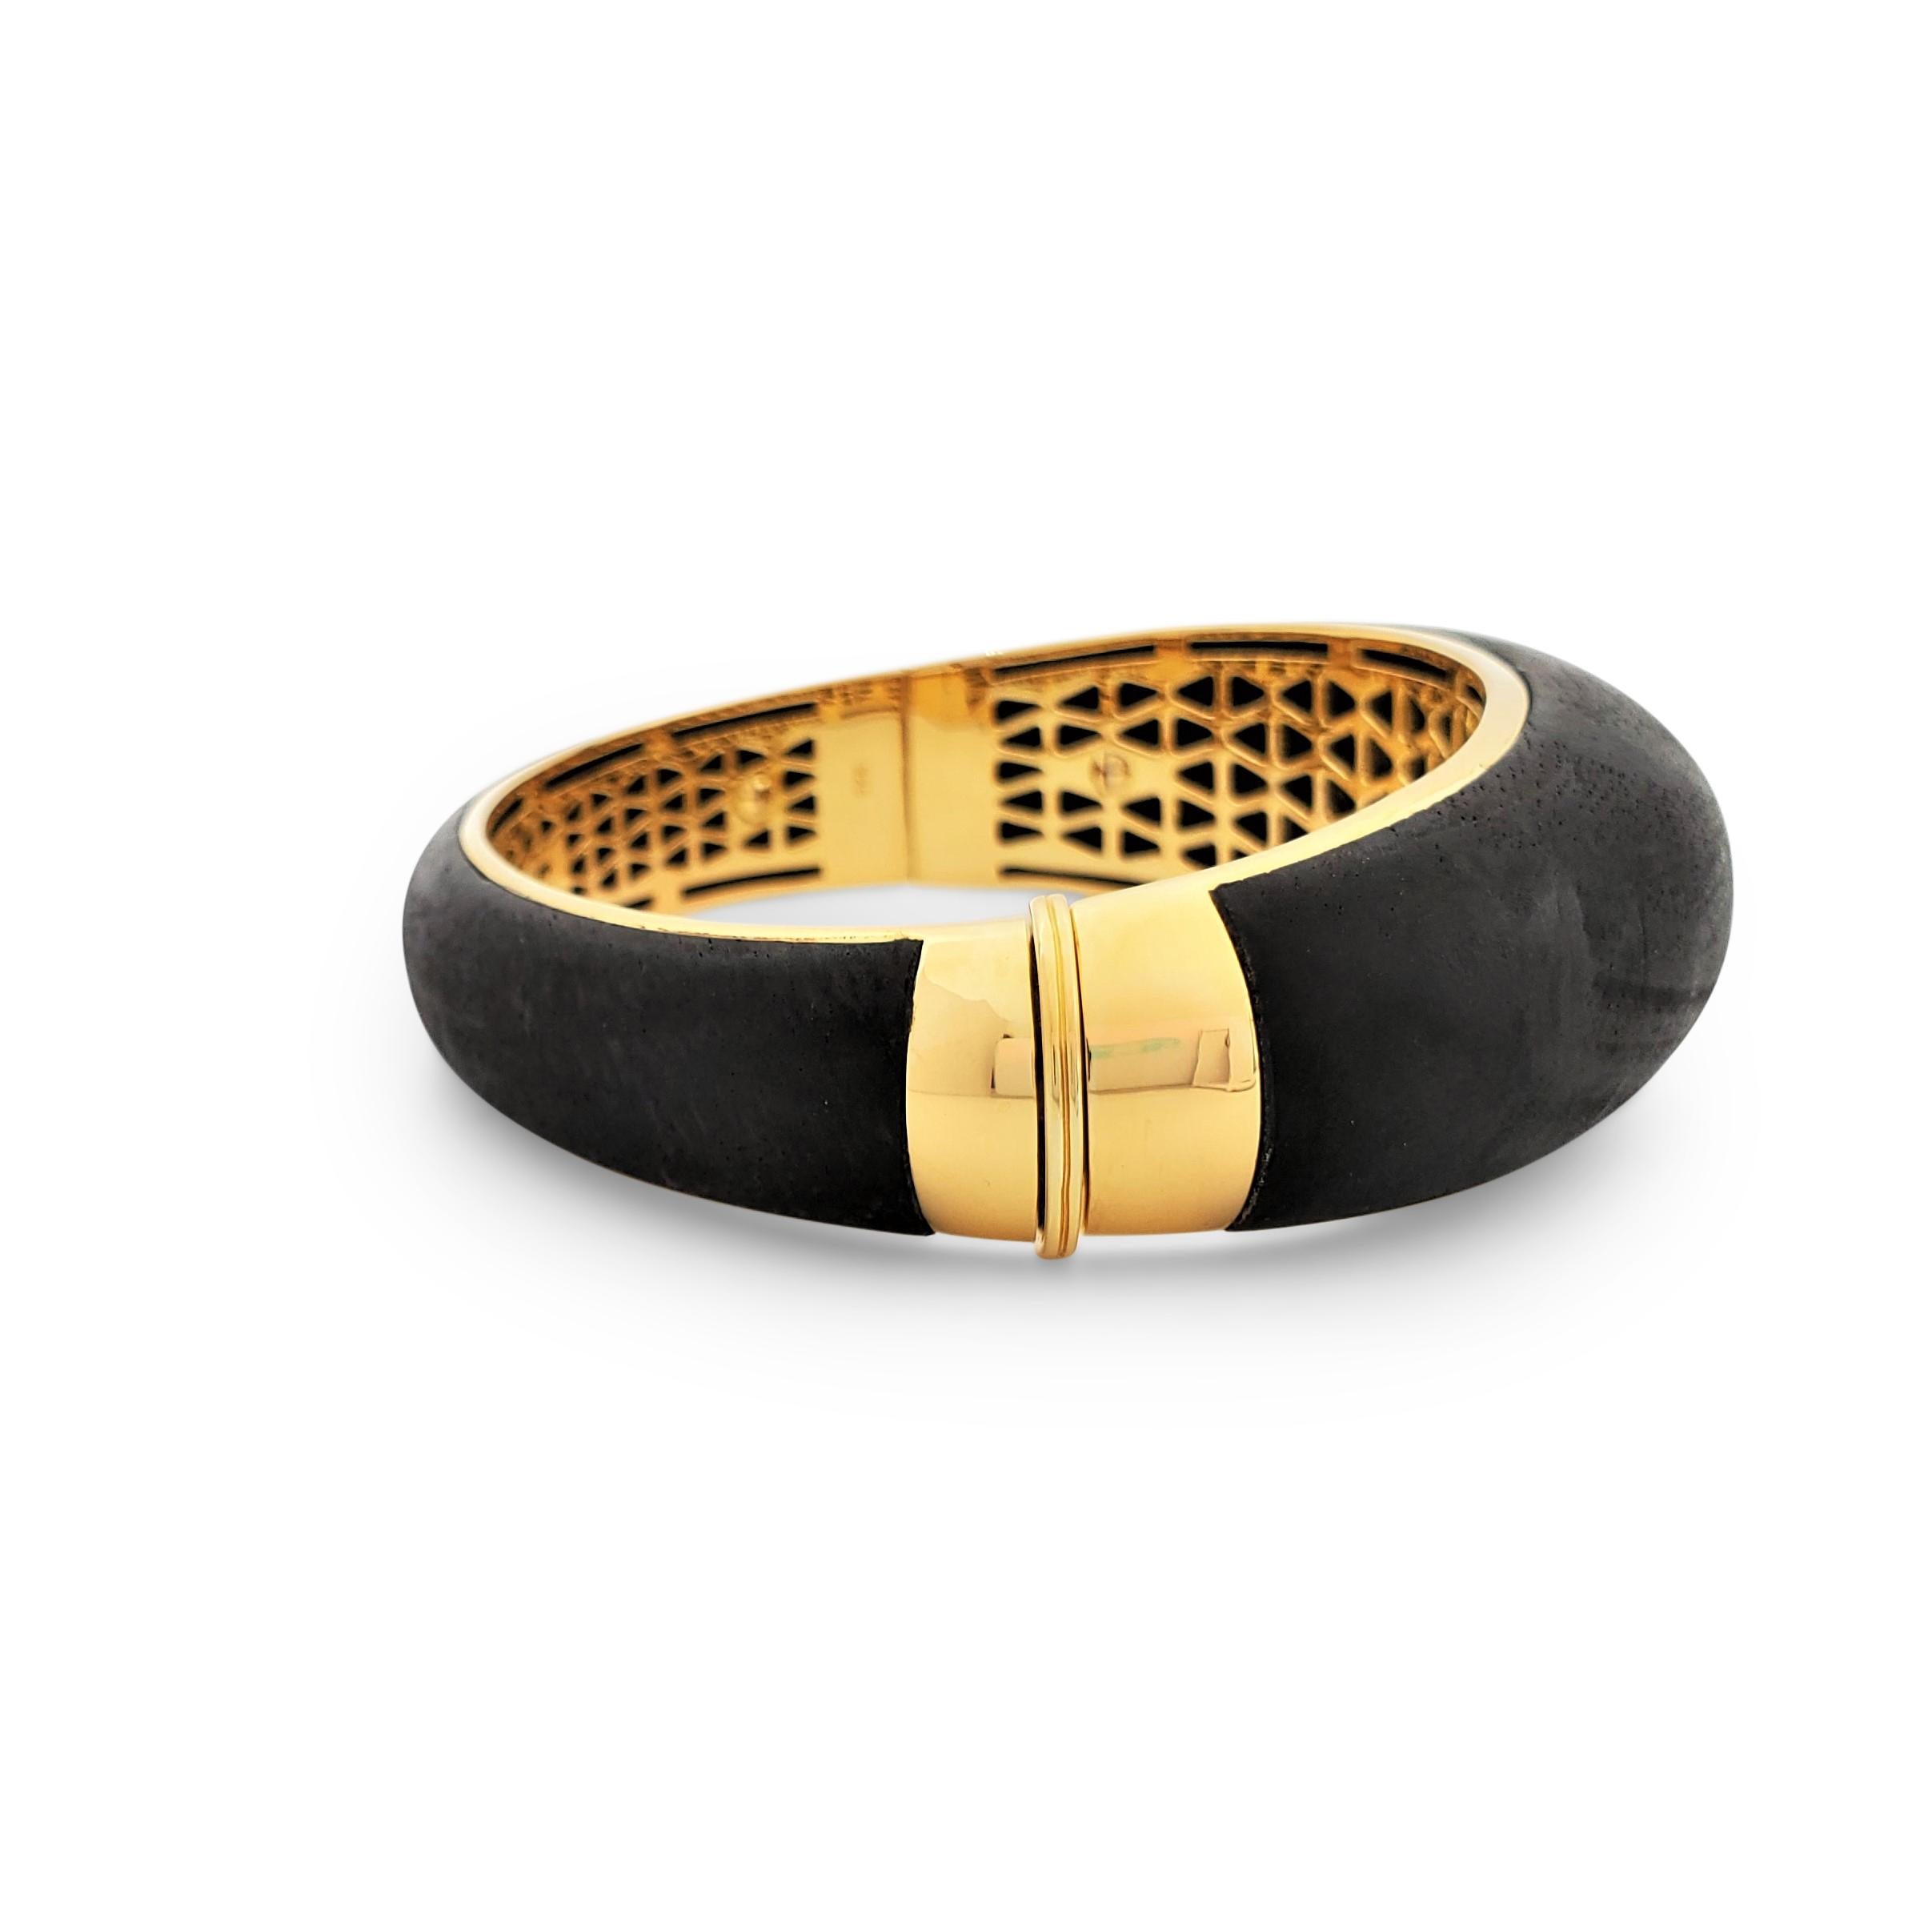 Authentic Roberto Coin 'Capri Plus' bangle bracelet crafted from ebony wood and accented with an estimated 2.30 carats of cognac-colored pave diamonds set into gold plated sterling silver. Signed Roberto Coin, 925, with signature ruby stone.